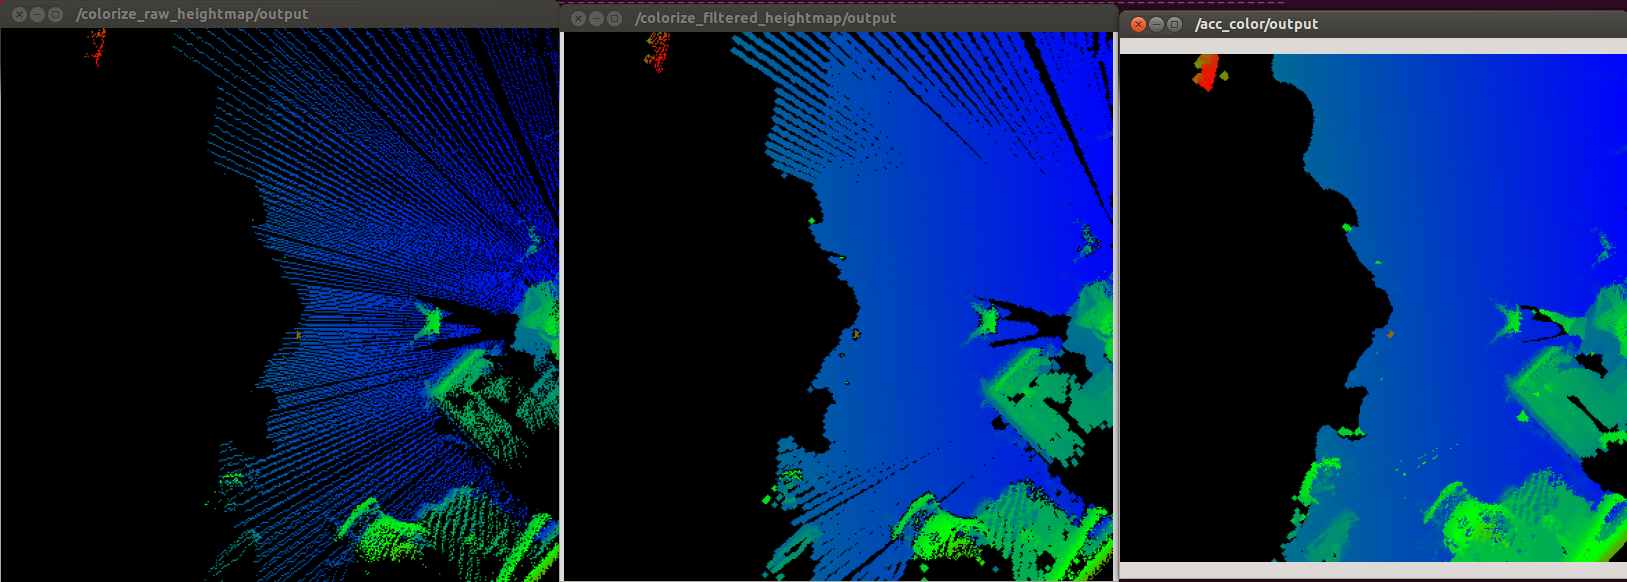 ../../_images/heightmap_time_accumulation.png